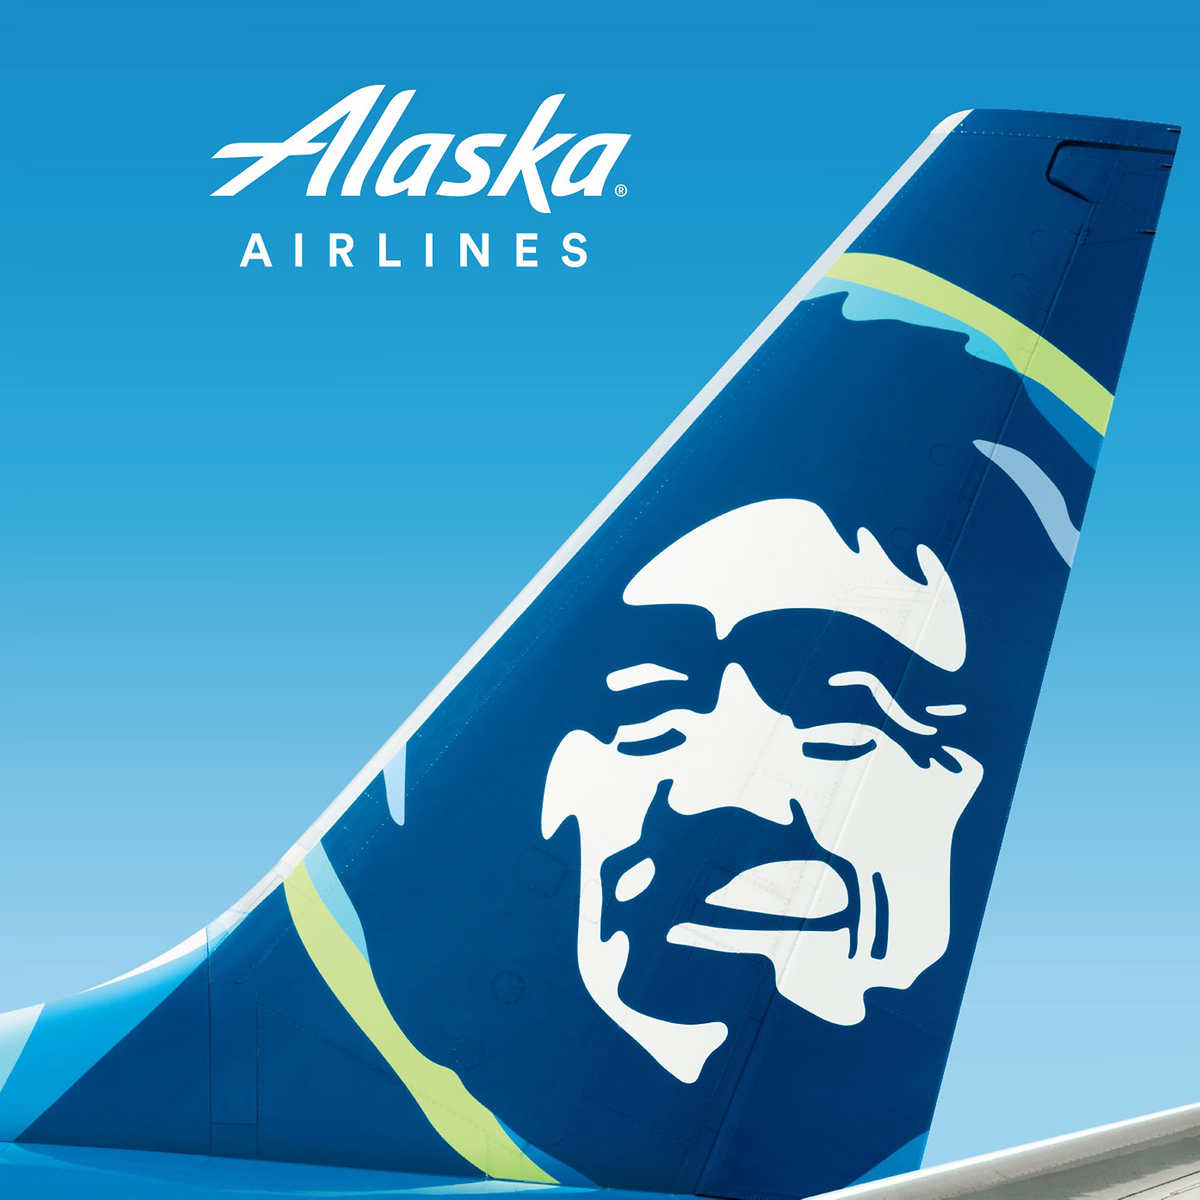 Alaskan Airline Gift Card $500 for $450 at Costco